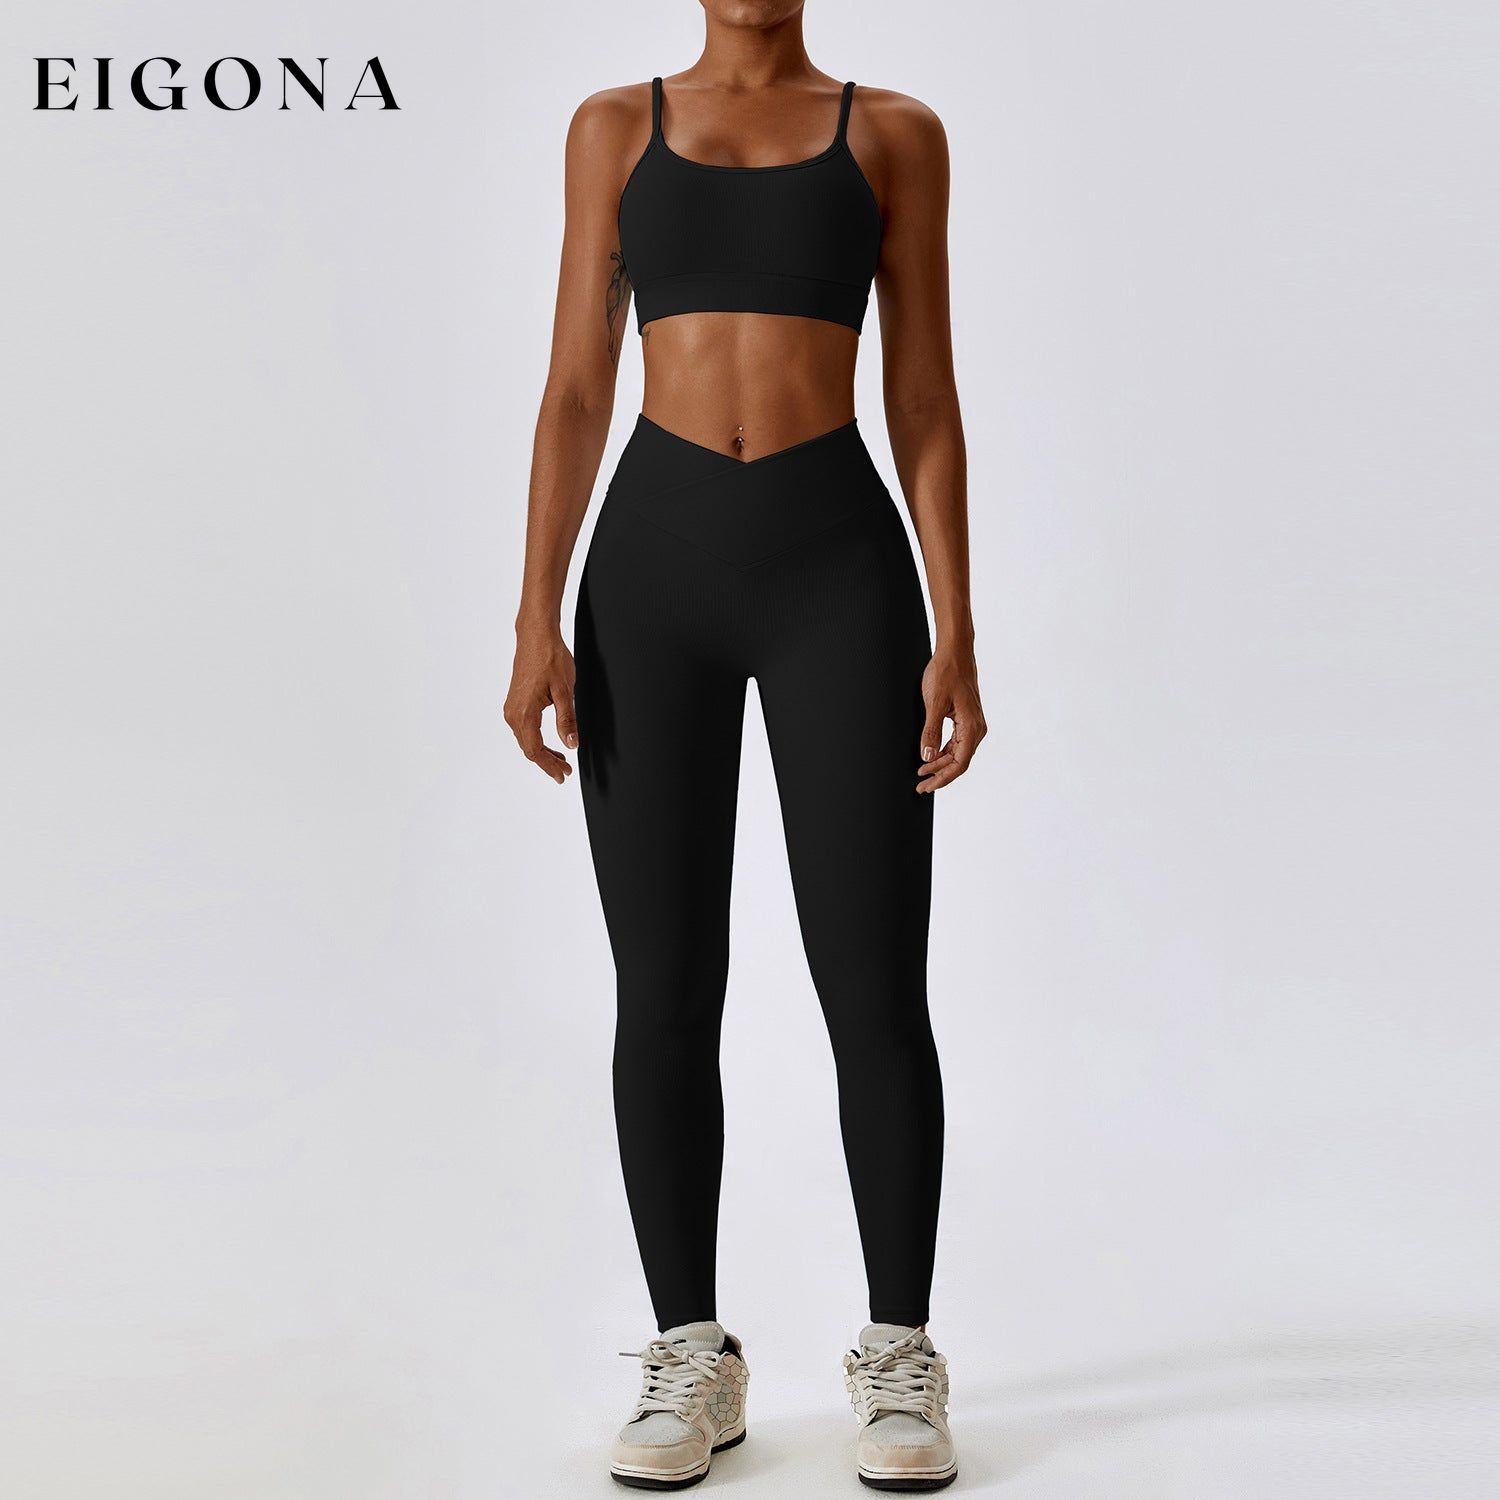 Thread Abdominal Shaping High Waist Beauty Back Yoga Suit Quick Drying Push up Hip Raise Skinny Workout Exercise Outfit -1 Bra Trousers High-Grade Black 2 piece activewear clothes set workout